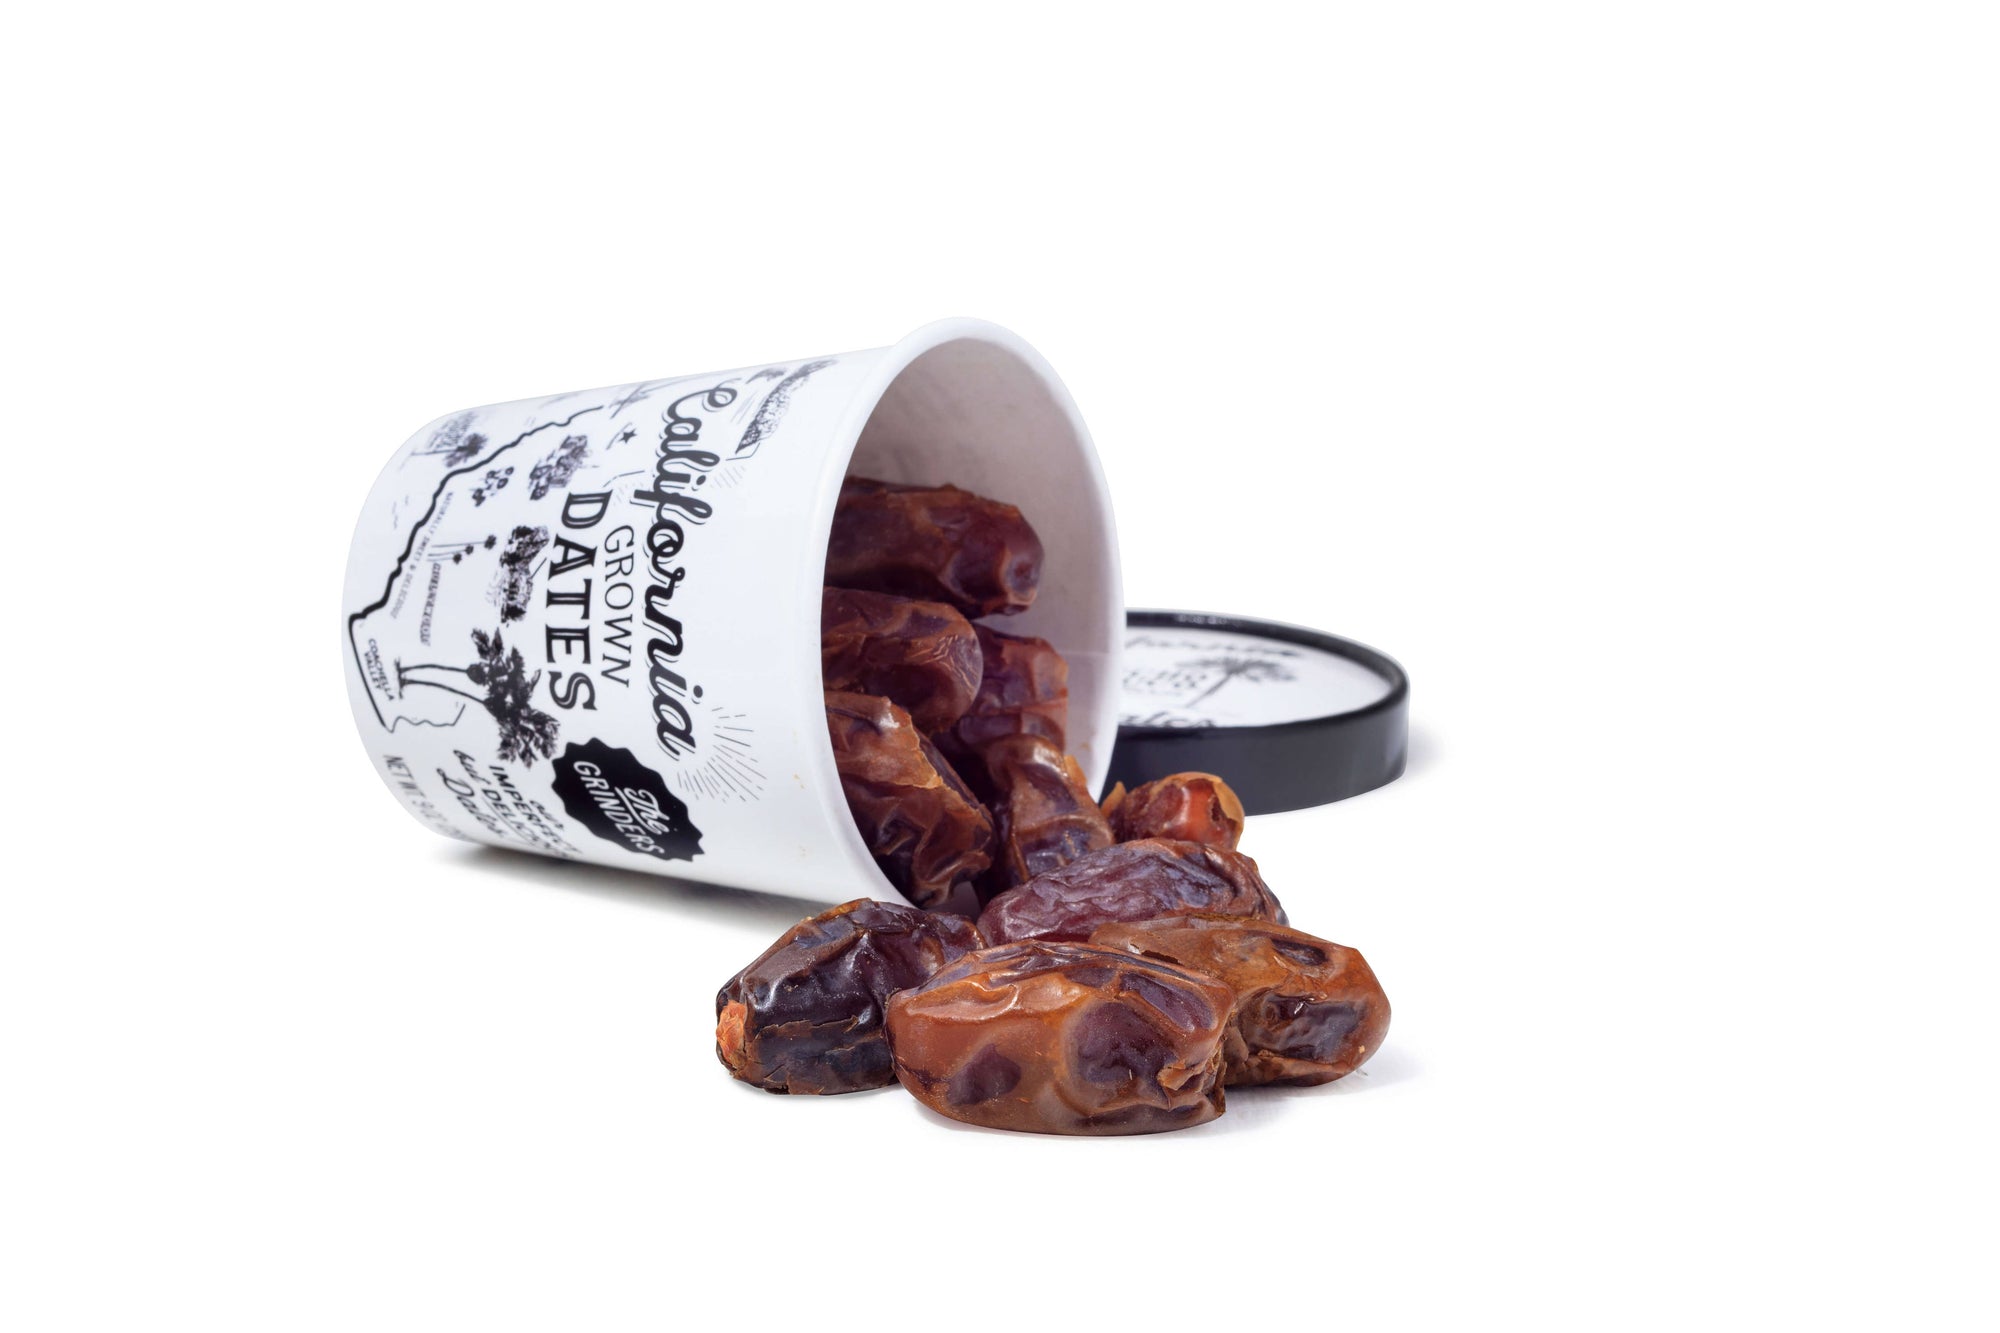 Rancho Meladuco - Imperfect Medjool Dates "The Grinders" - 9 oz. - Space Camp